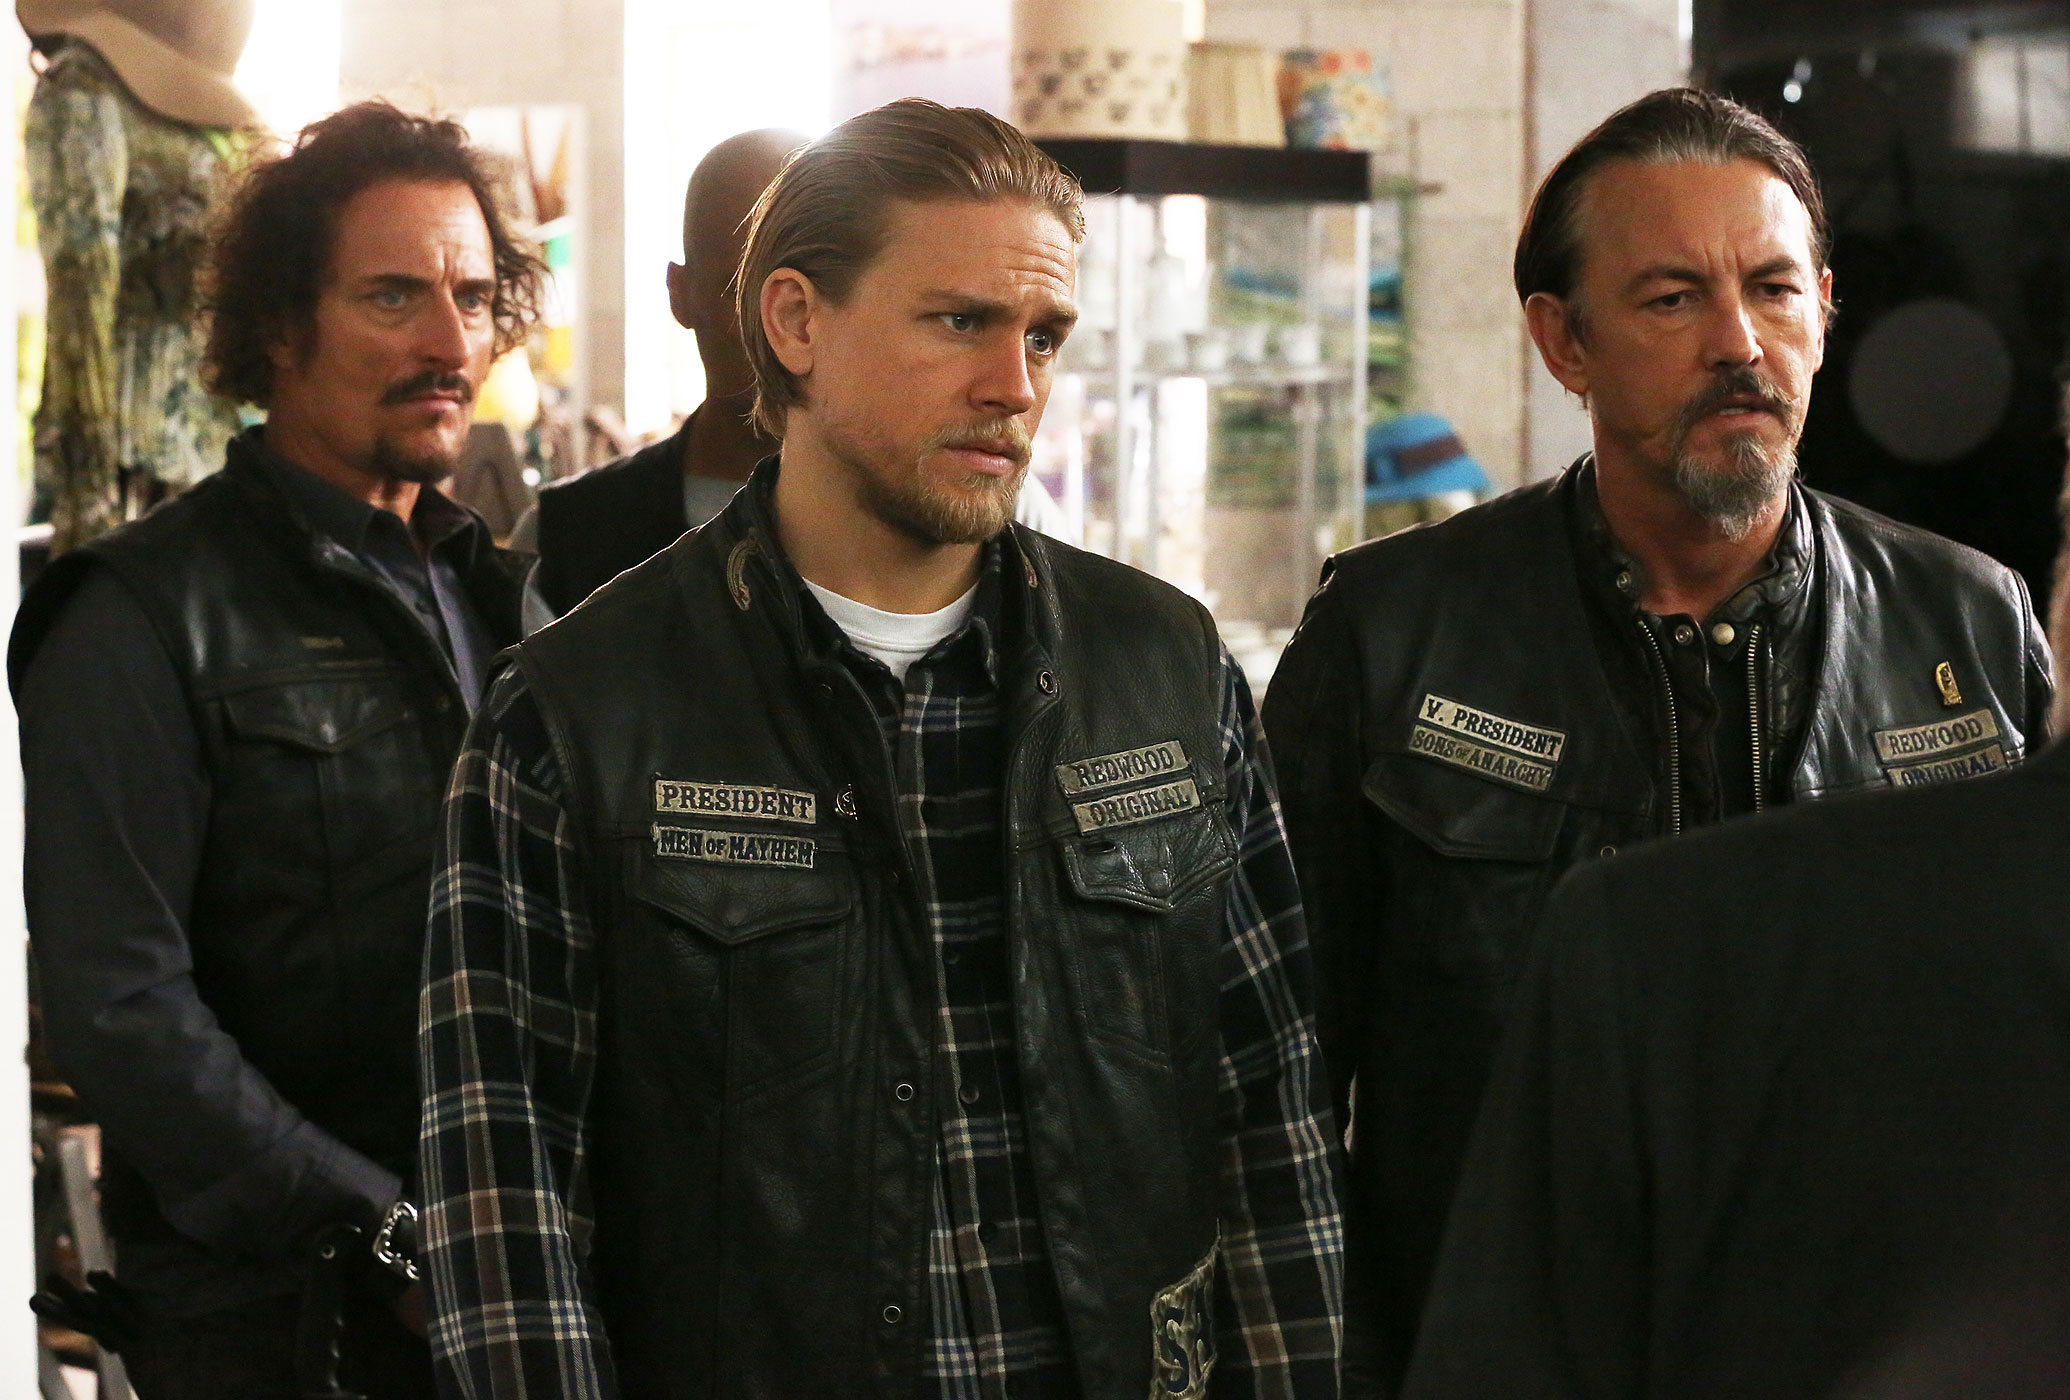 SONS OF ANARCHY -- "Red Rose" -- Episode 712 -- Airs Tuesday, December 2, 10:00 pm e/p) -- Pictured: (L-R) Kim Coates as Tig Trager, Charlie Hunnam as Jax Teller, Tommy Flanagan as Chibs Telford. CR: Byron Cohen/FX